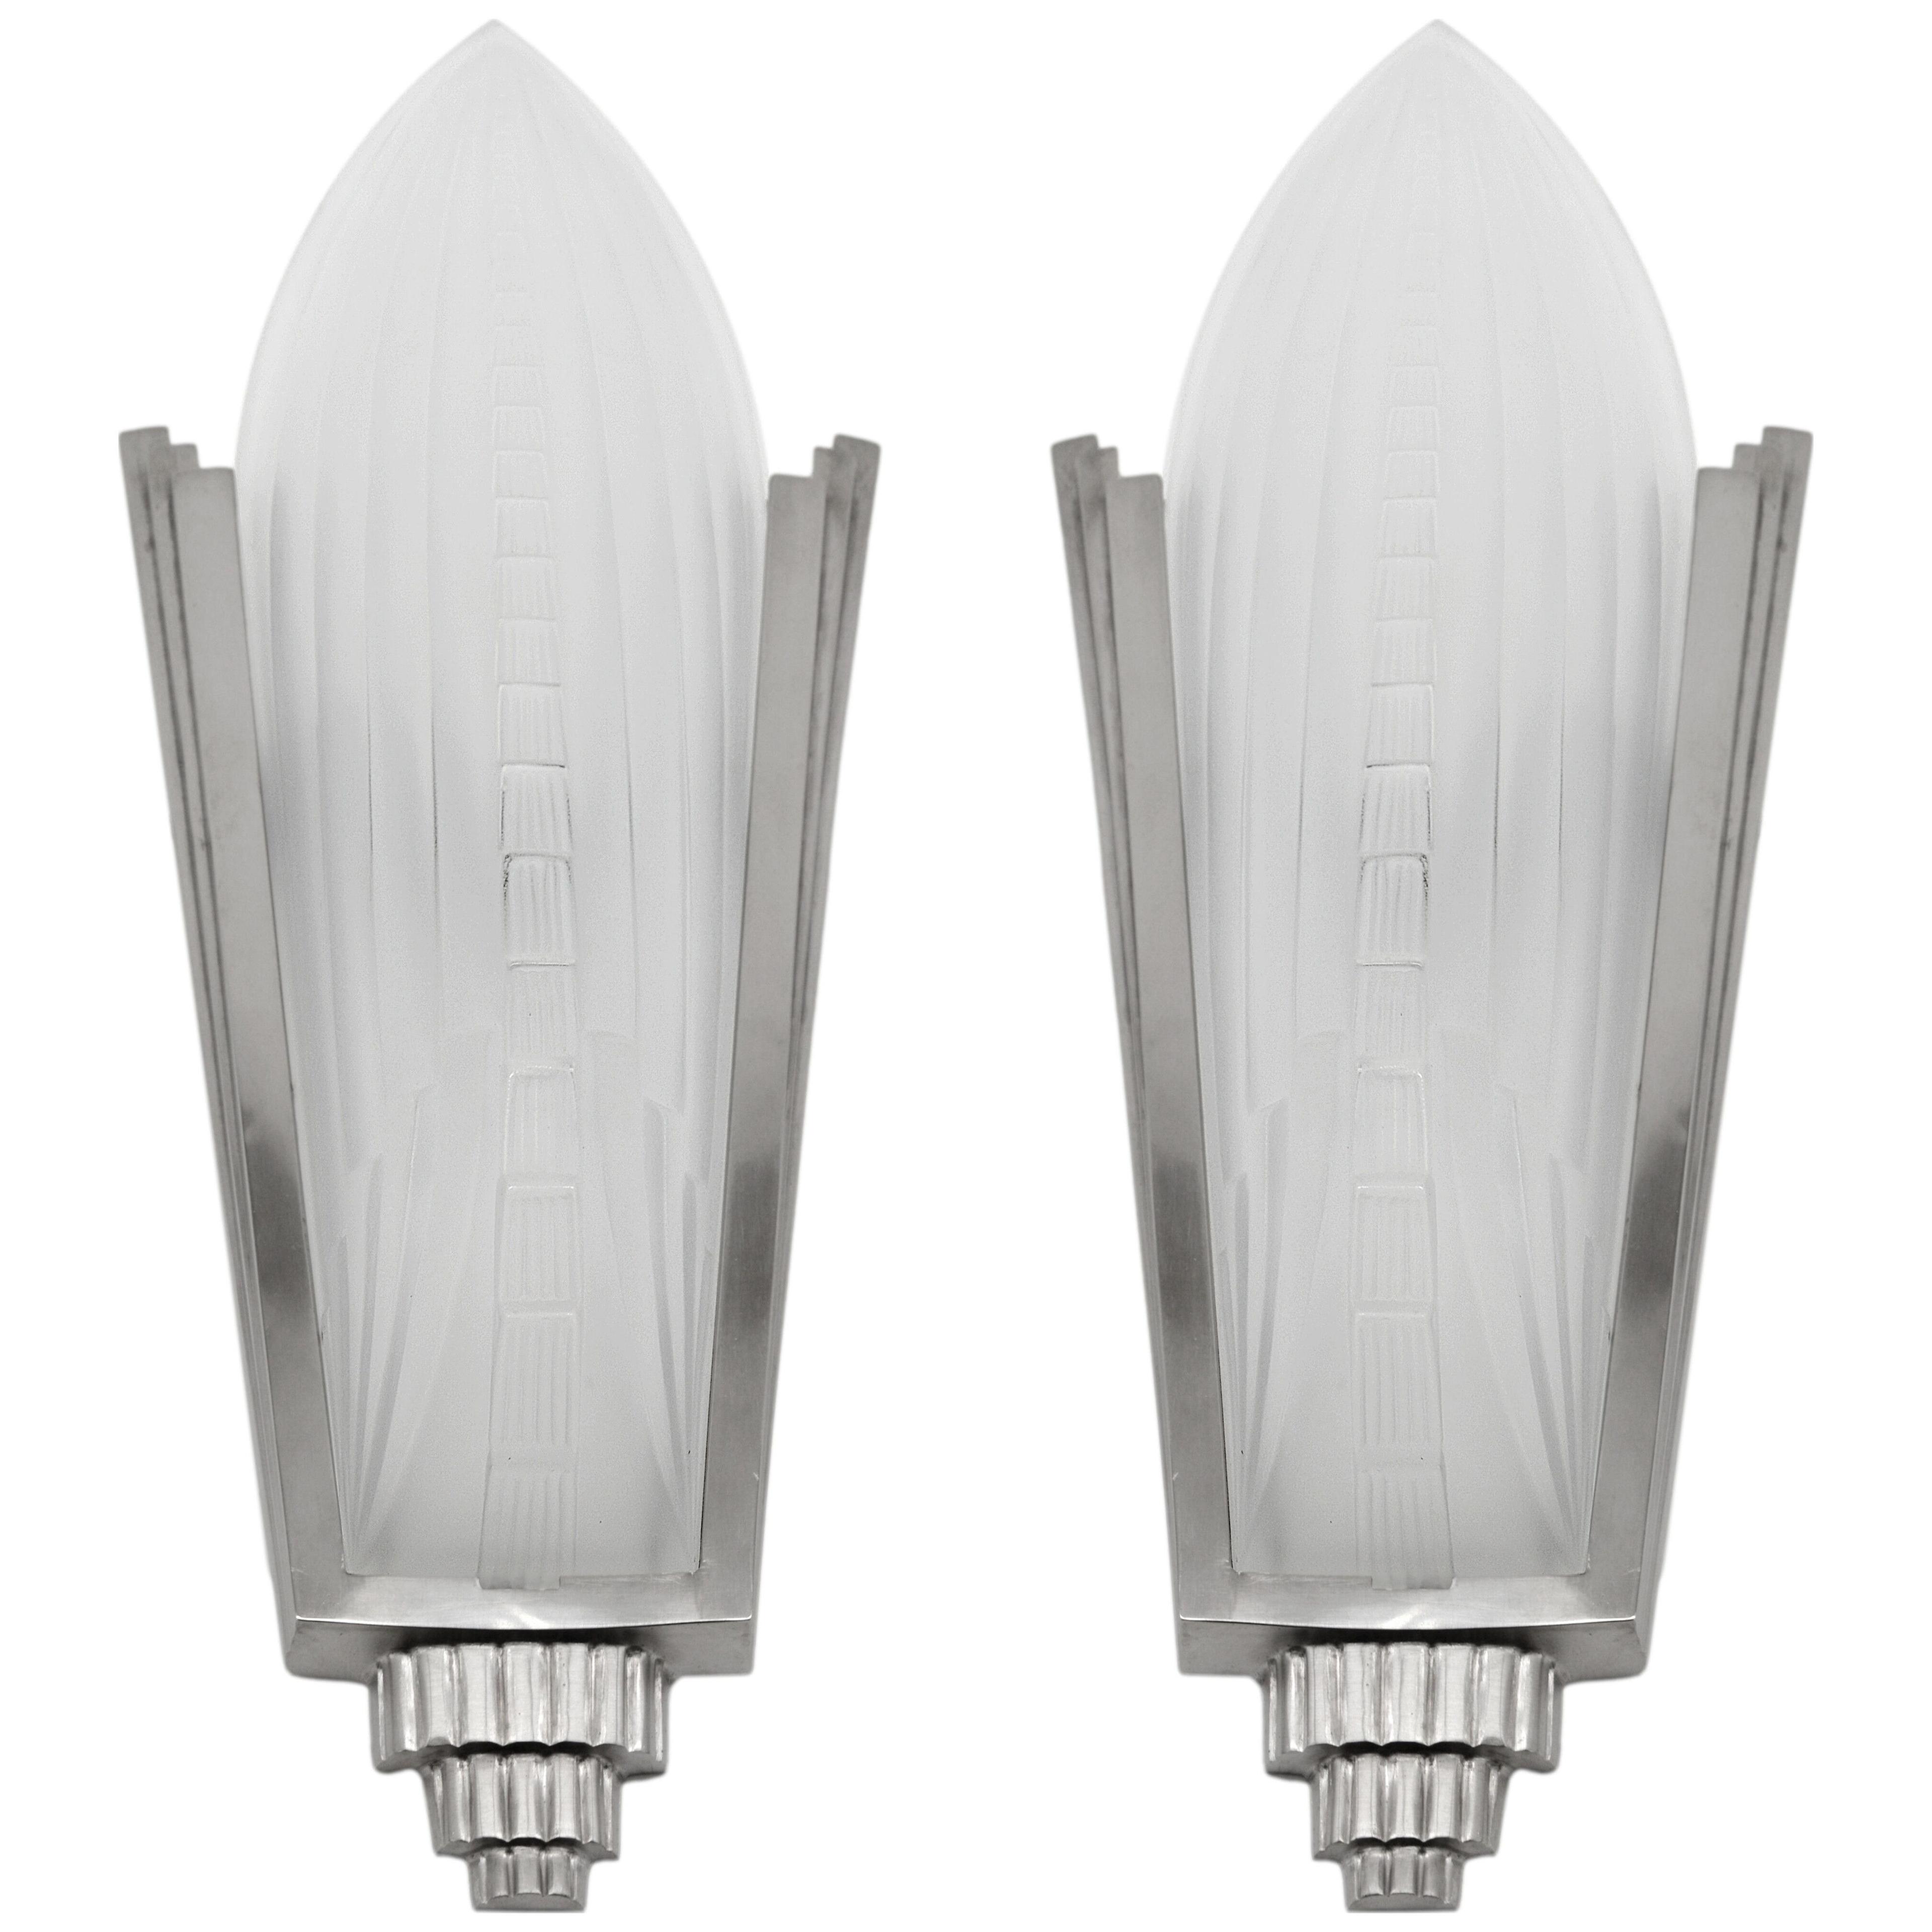 GENET & MICHON Large French Art Deco Pair of Wall Sconces, 1920s